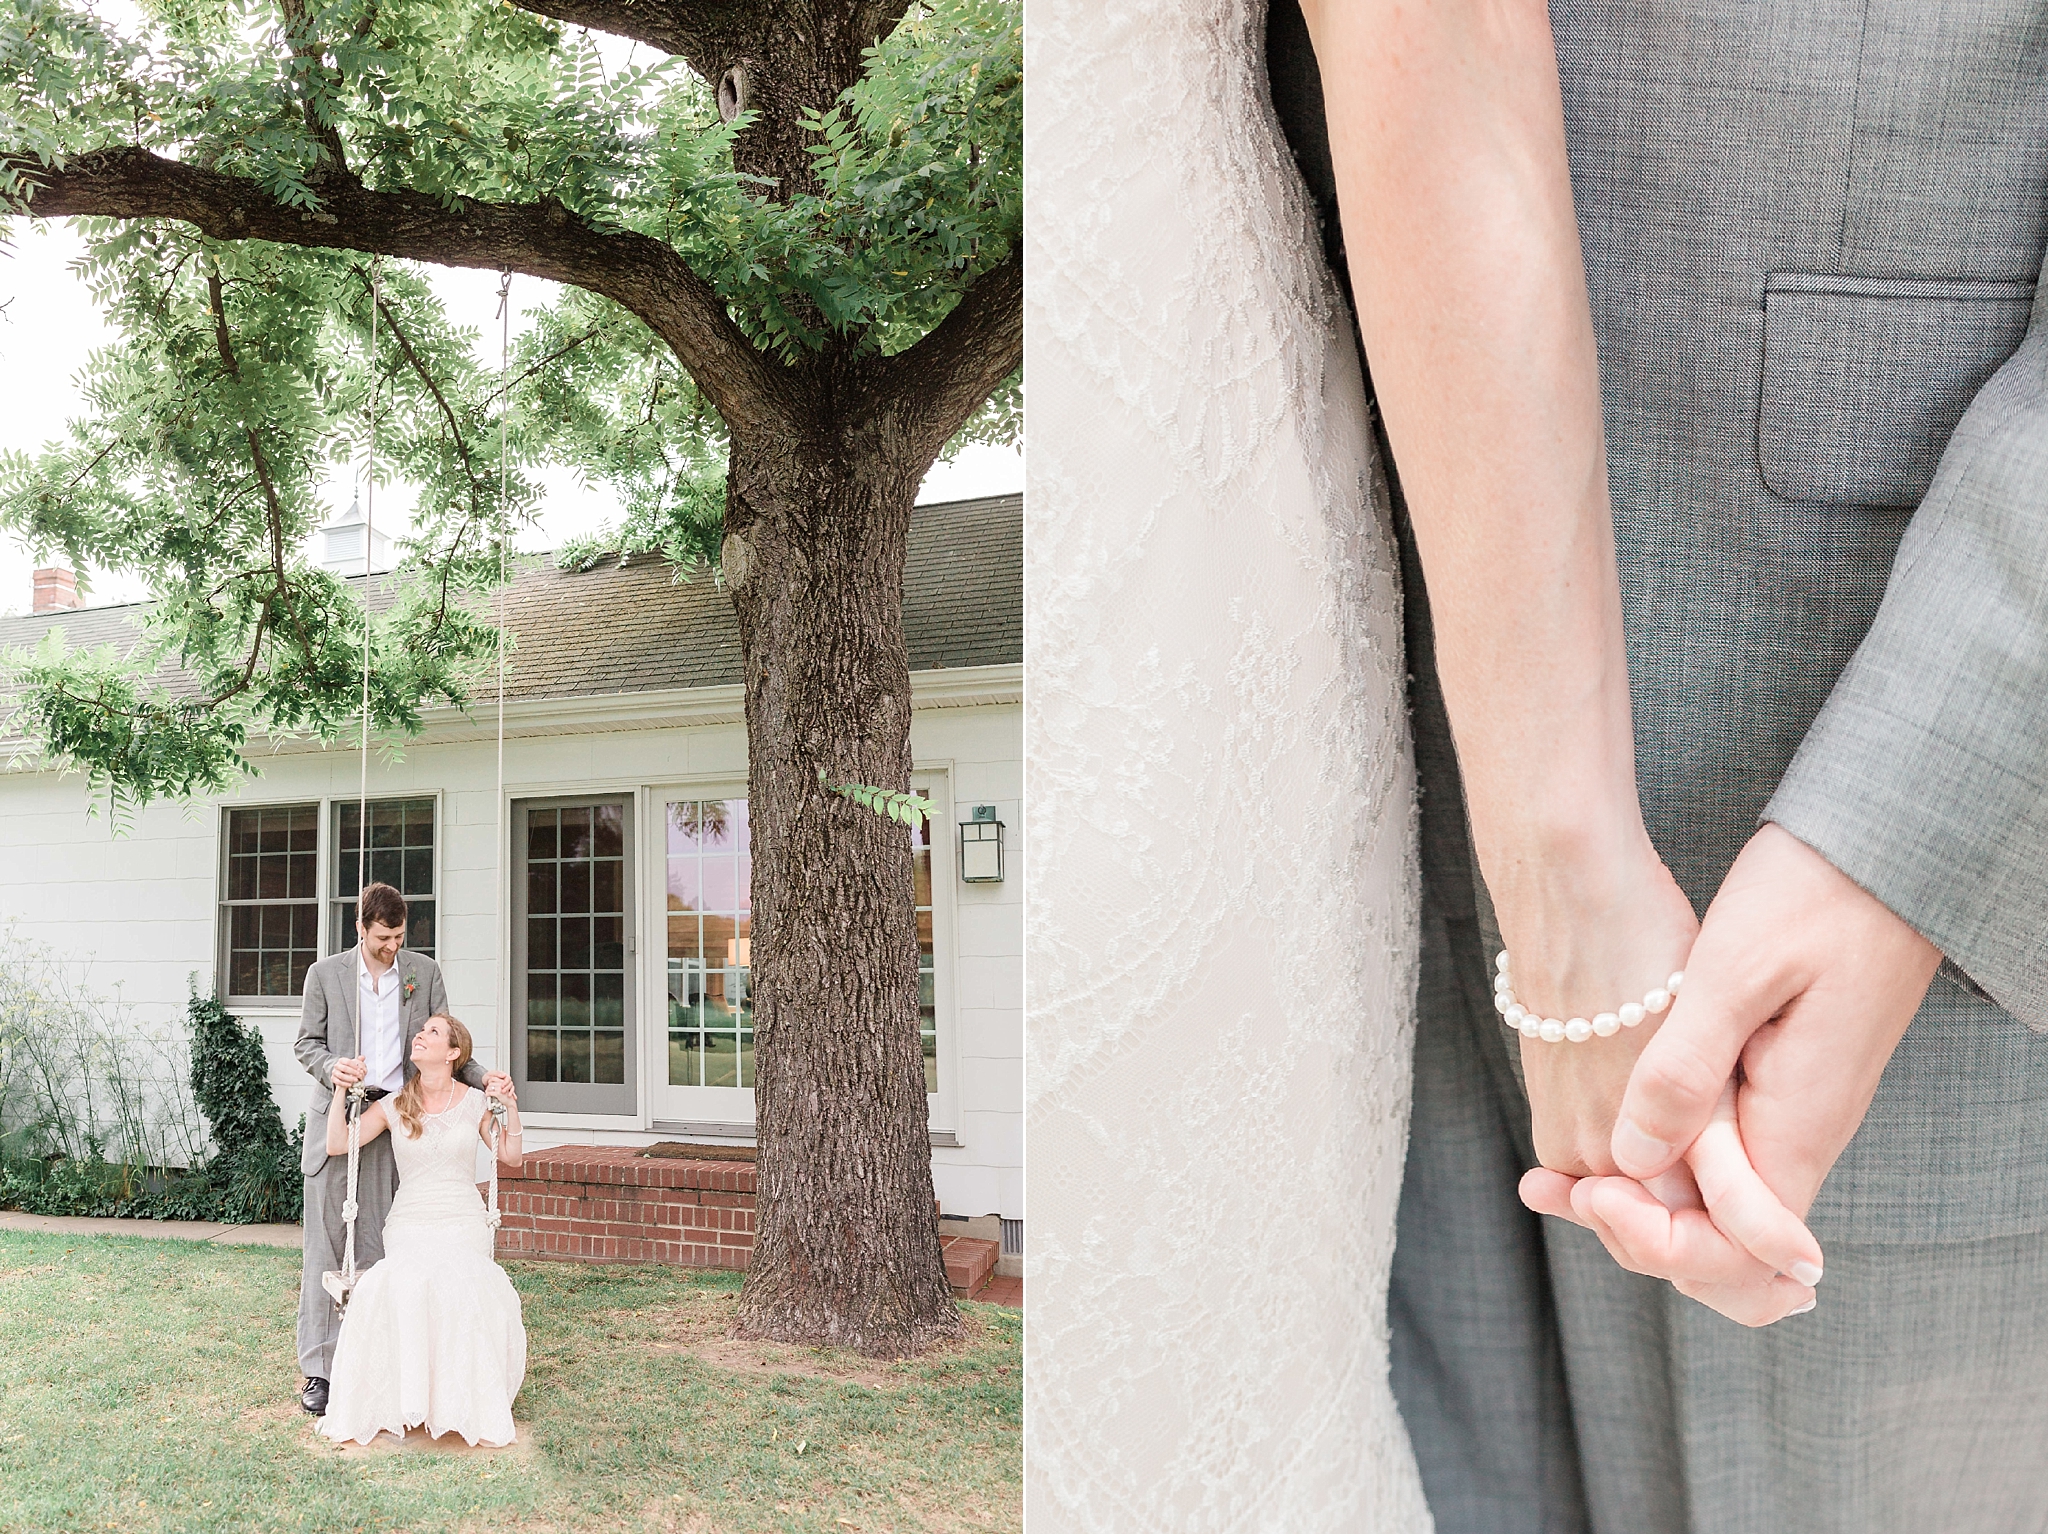 A sweet summer wedding is captured at The Inn at Huntingfield Creek in Rock Hall, MD on the Eastern Shore by Washington, DC photographer, Alicia Lacey.